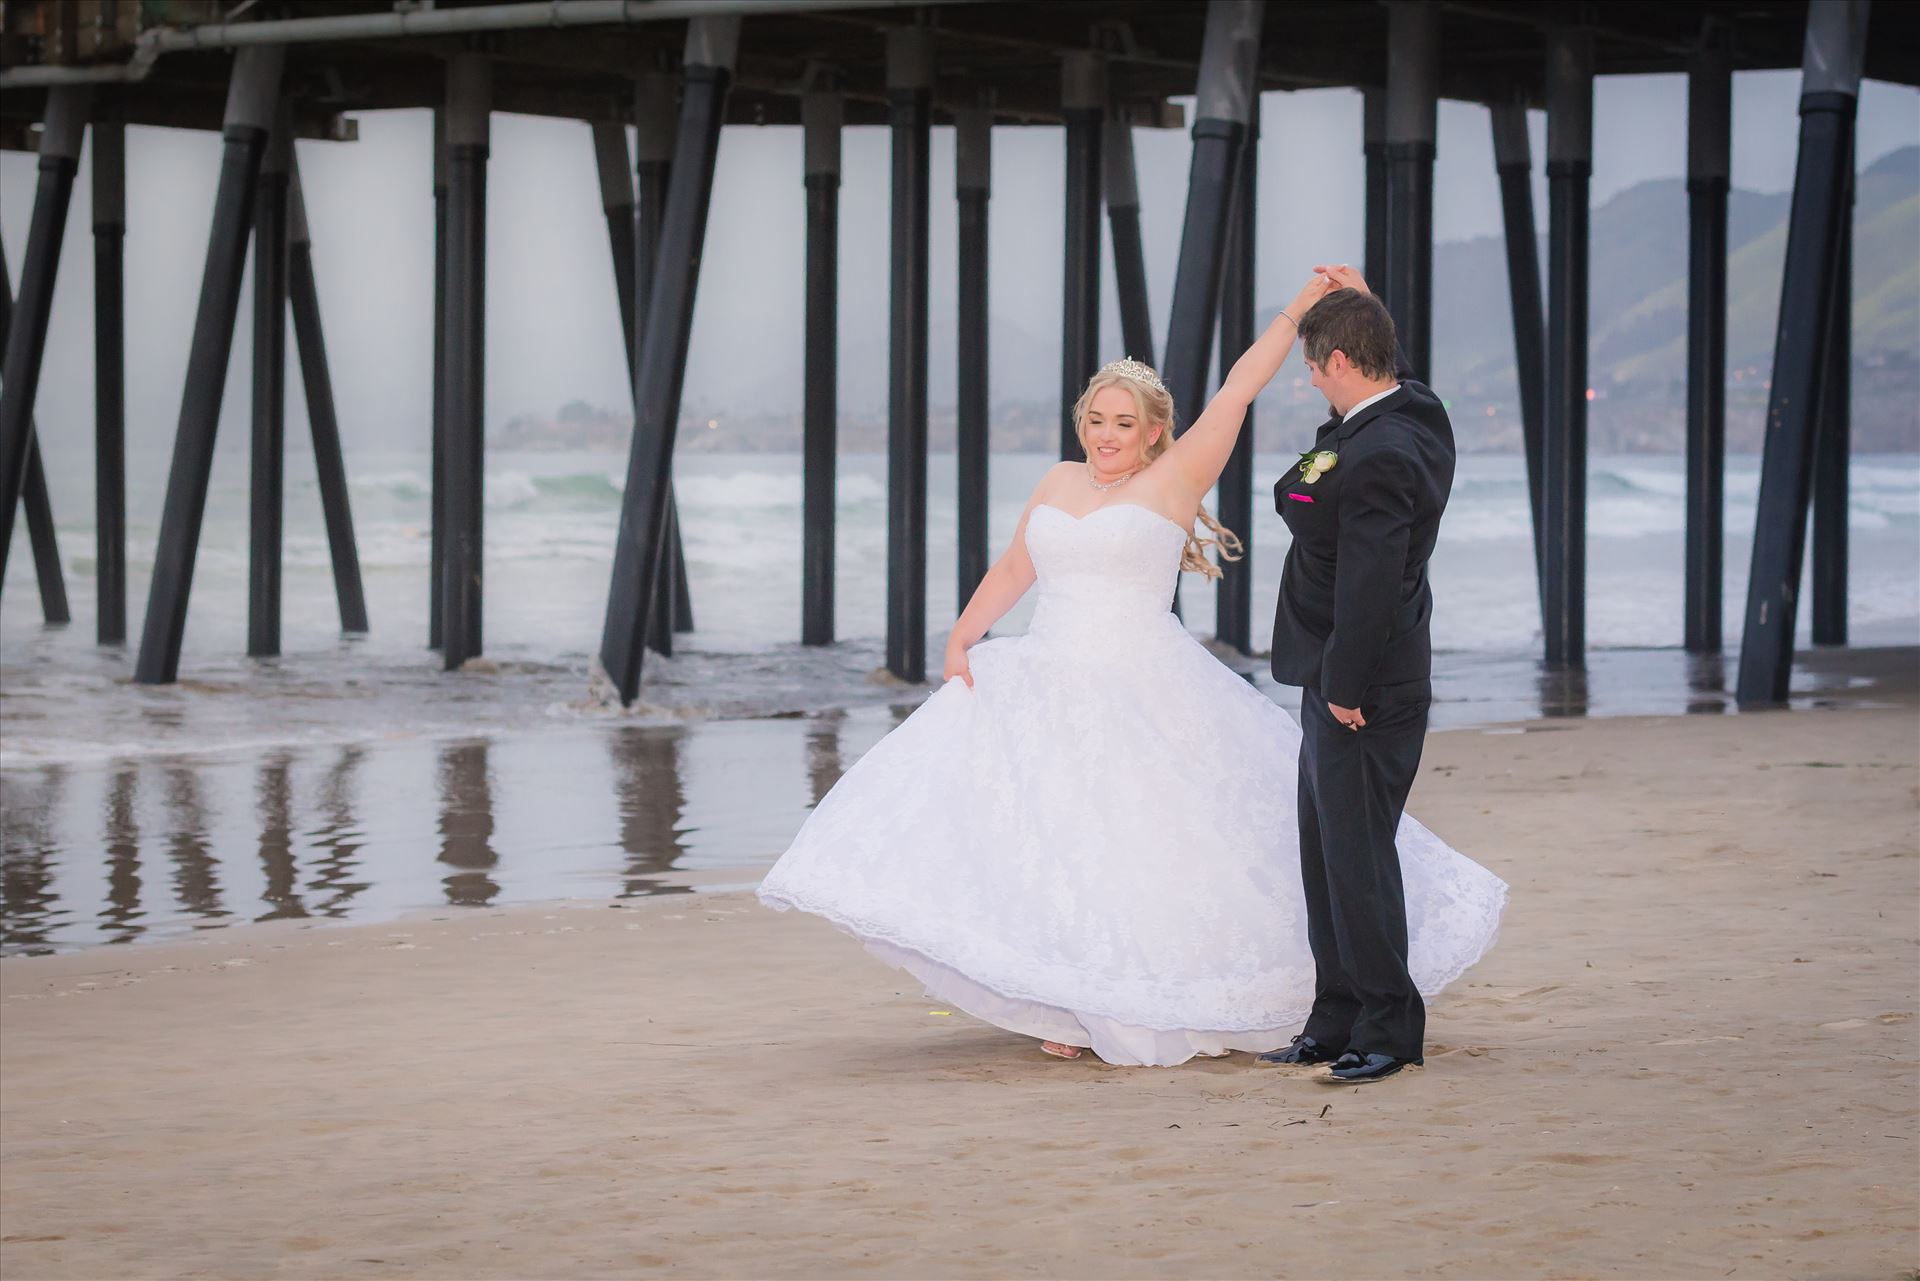 Jessica and Michael 68 Sea Venture Resort and Spa Wedding Photography by Mirror's Edge Photography in Pismo Beach, California. Bride and Groom at Pismo Beach Pier by Sarah Williams